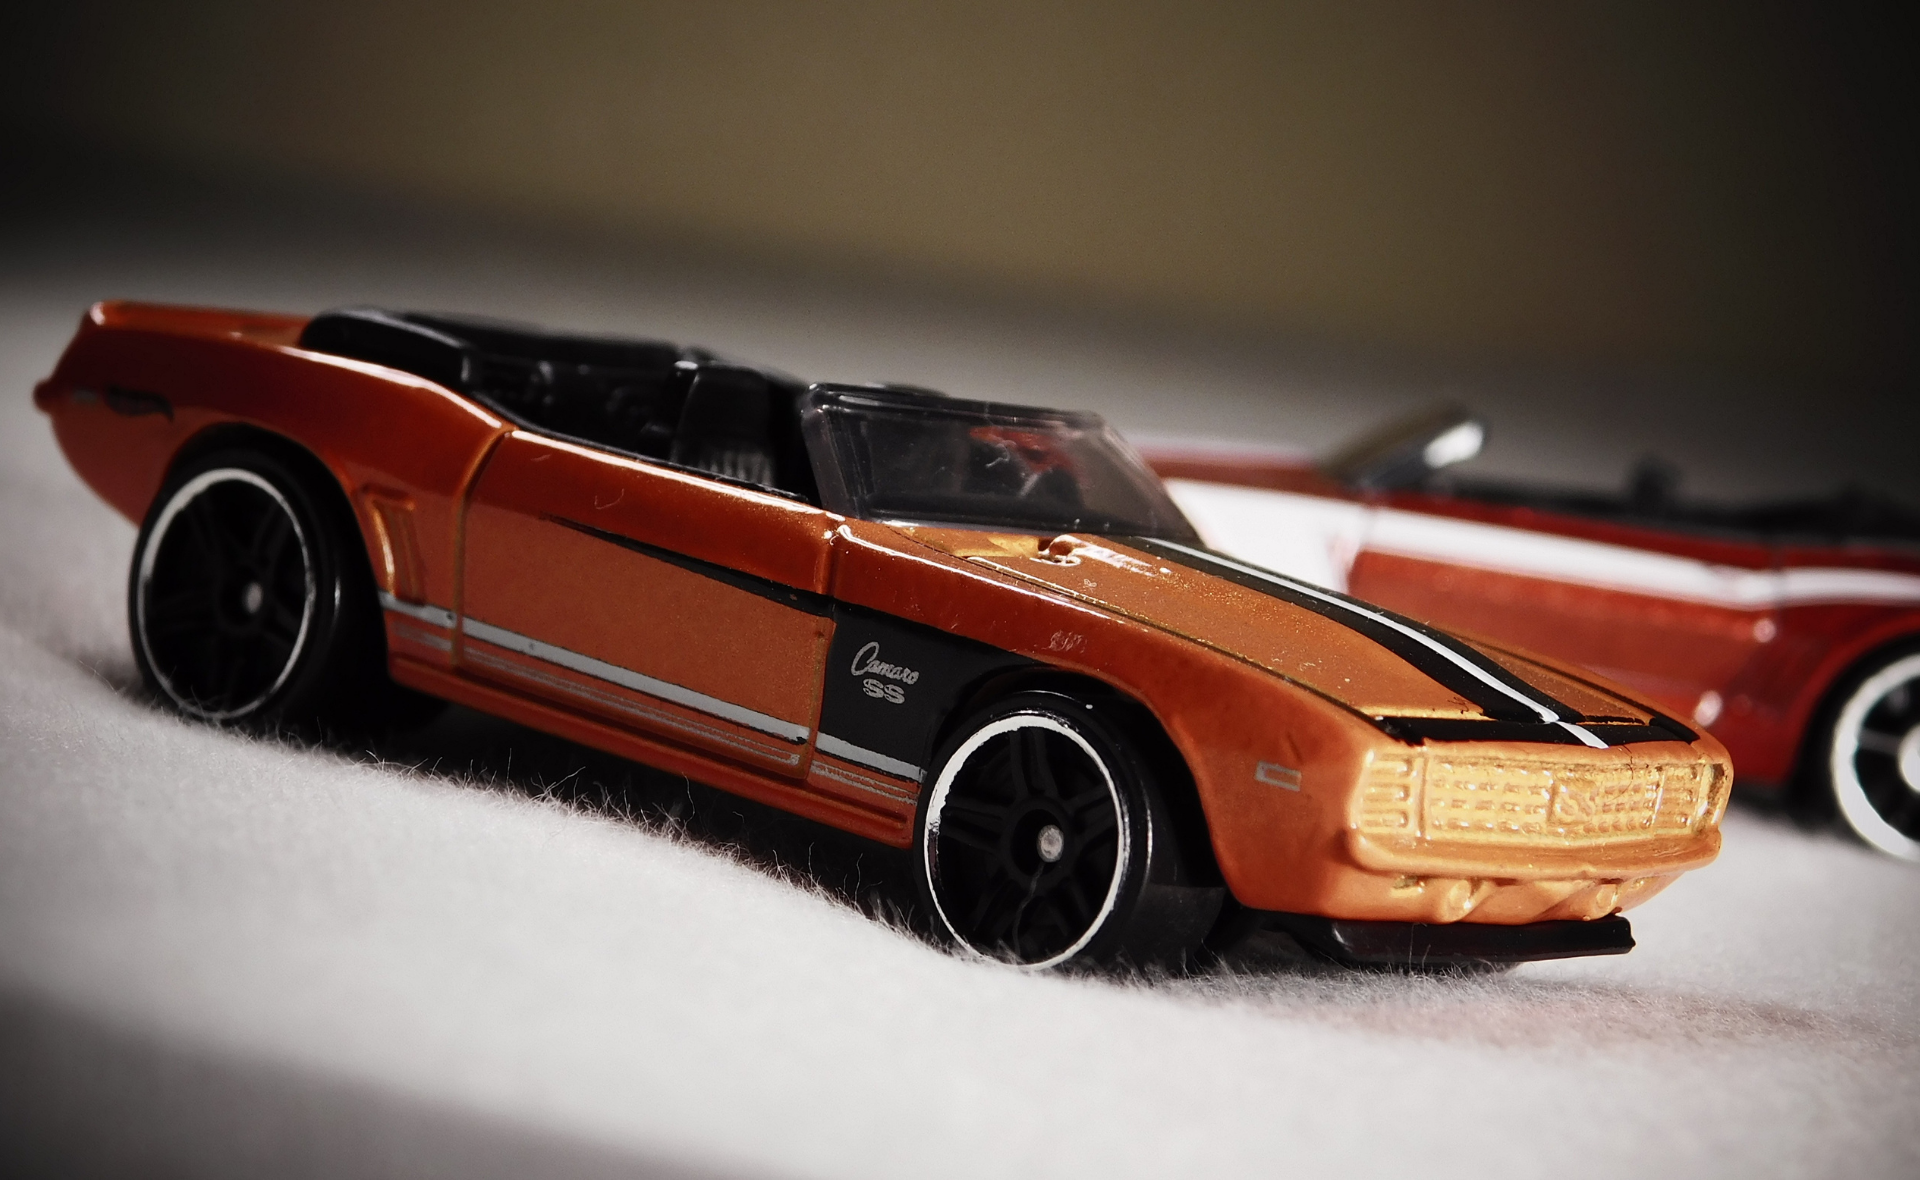 Amazing Diecast Car Display Ideas that You Will Love